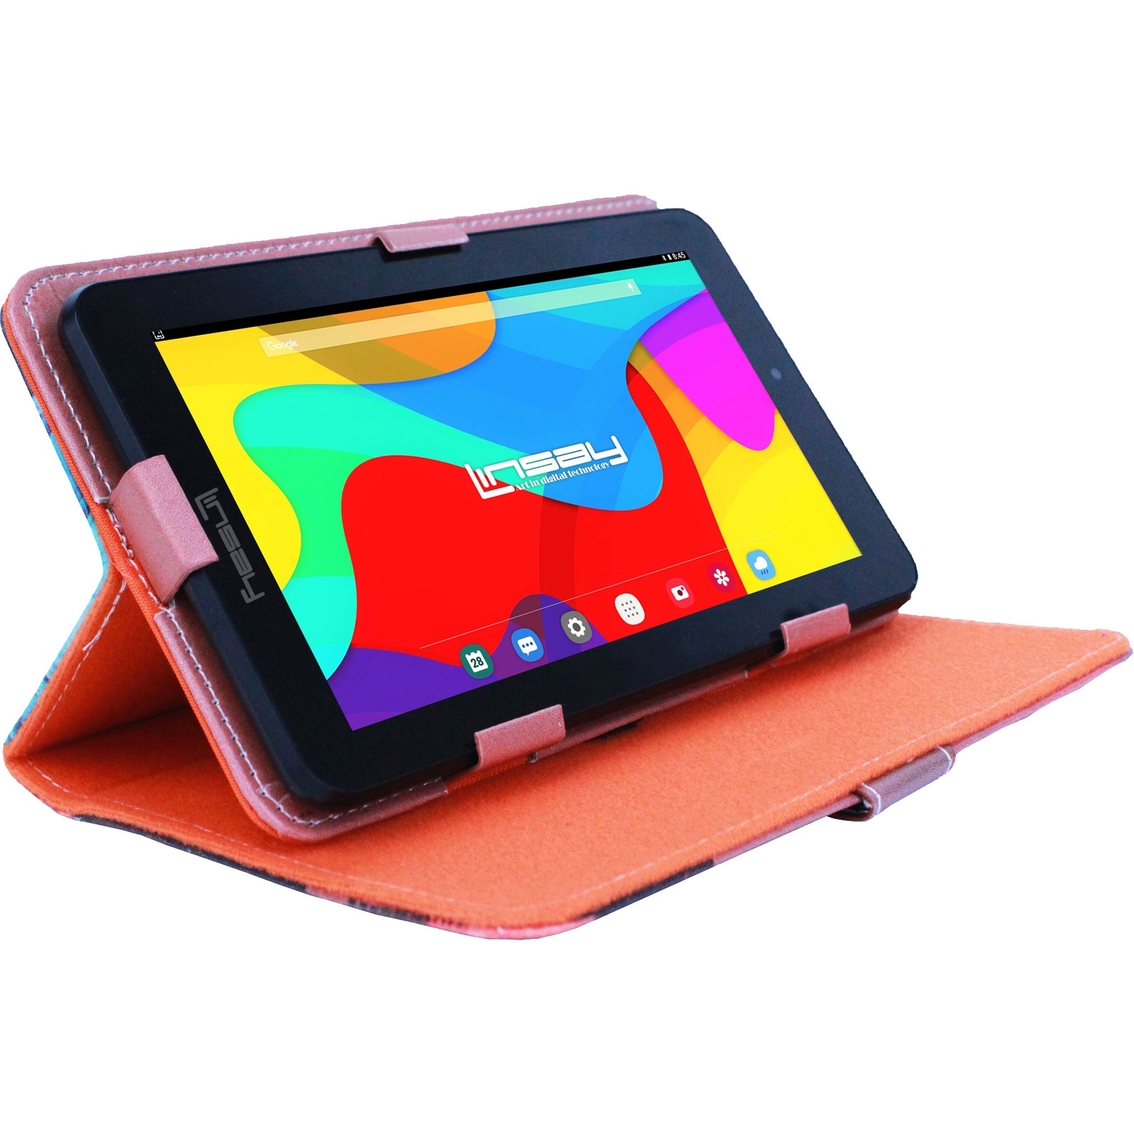 Linsay 7 in. 2GB RAM 32GB Tablet with Case, Holder and Pen - Image 3 of 3